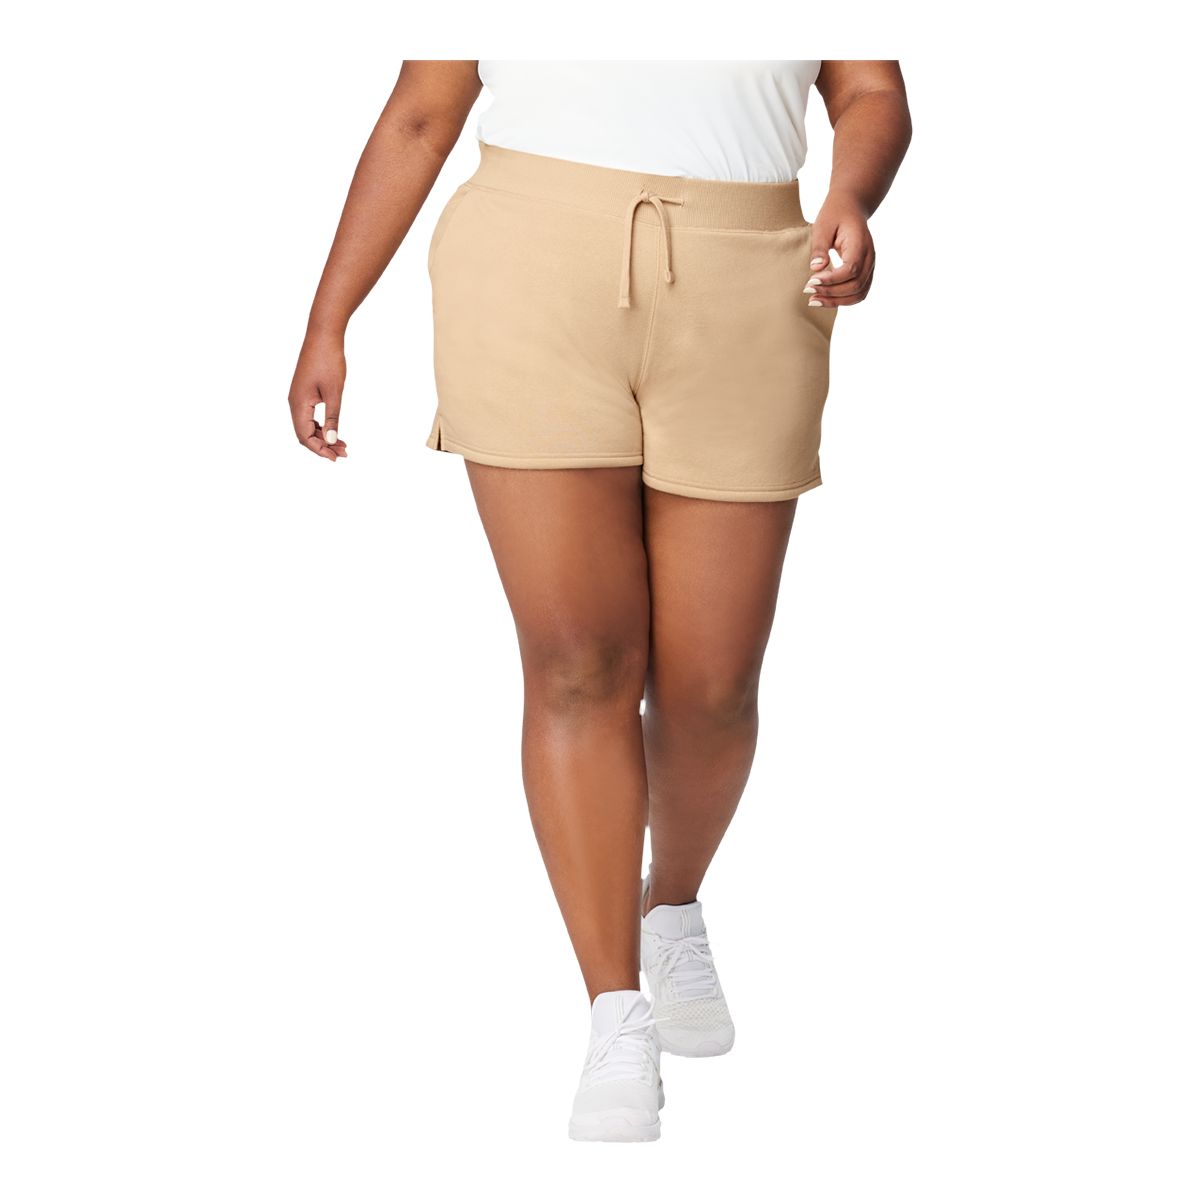 Find Cute Shorts for Women With Style  Score On-Trend Women's Shorts for  Sale at Great Prices - Lulus